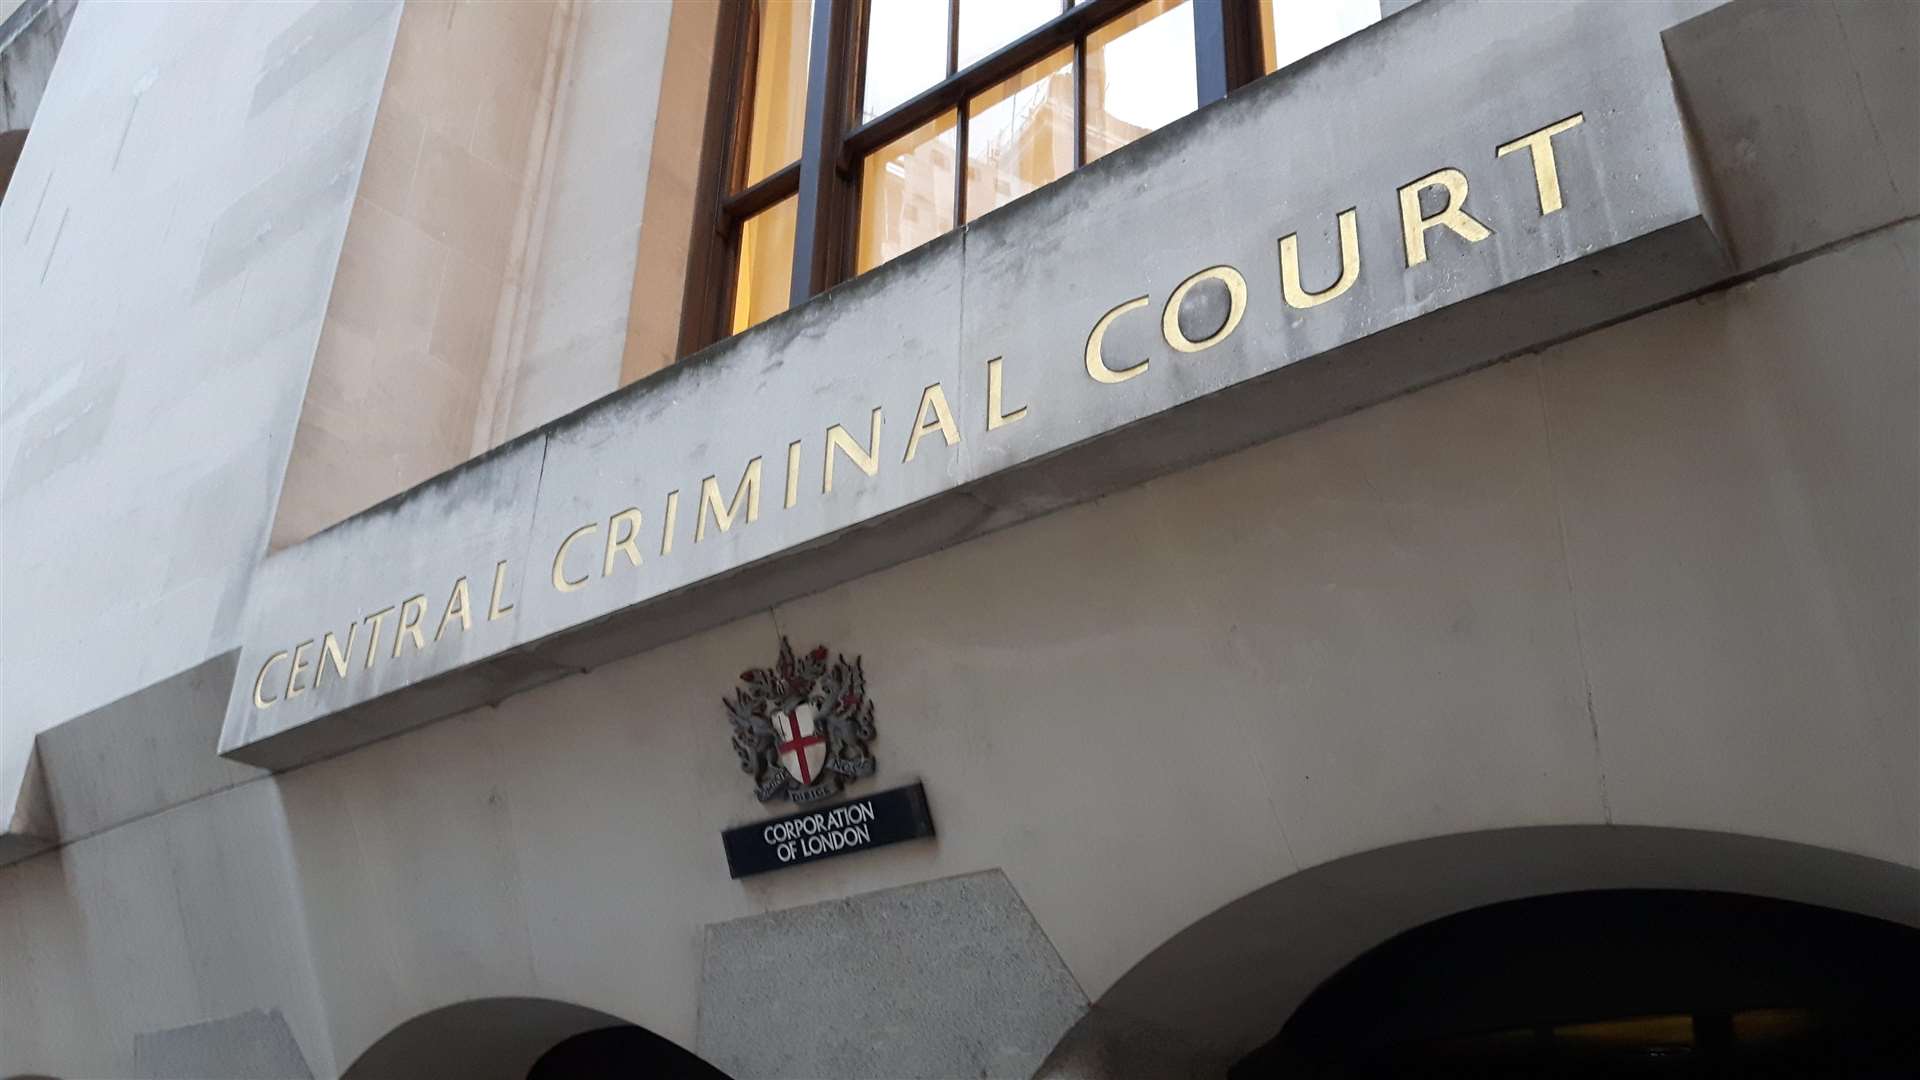 The case was heard at The Old Bailey, Central Criminal Court, London